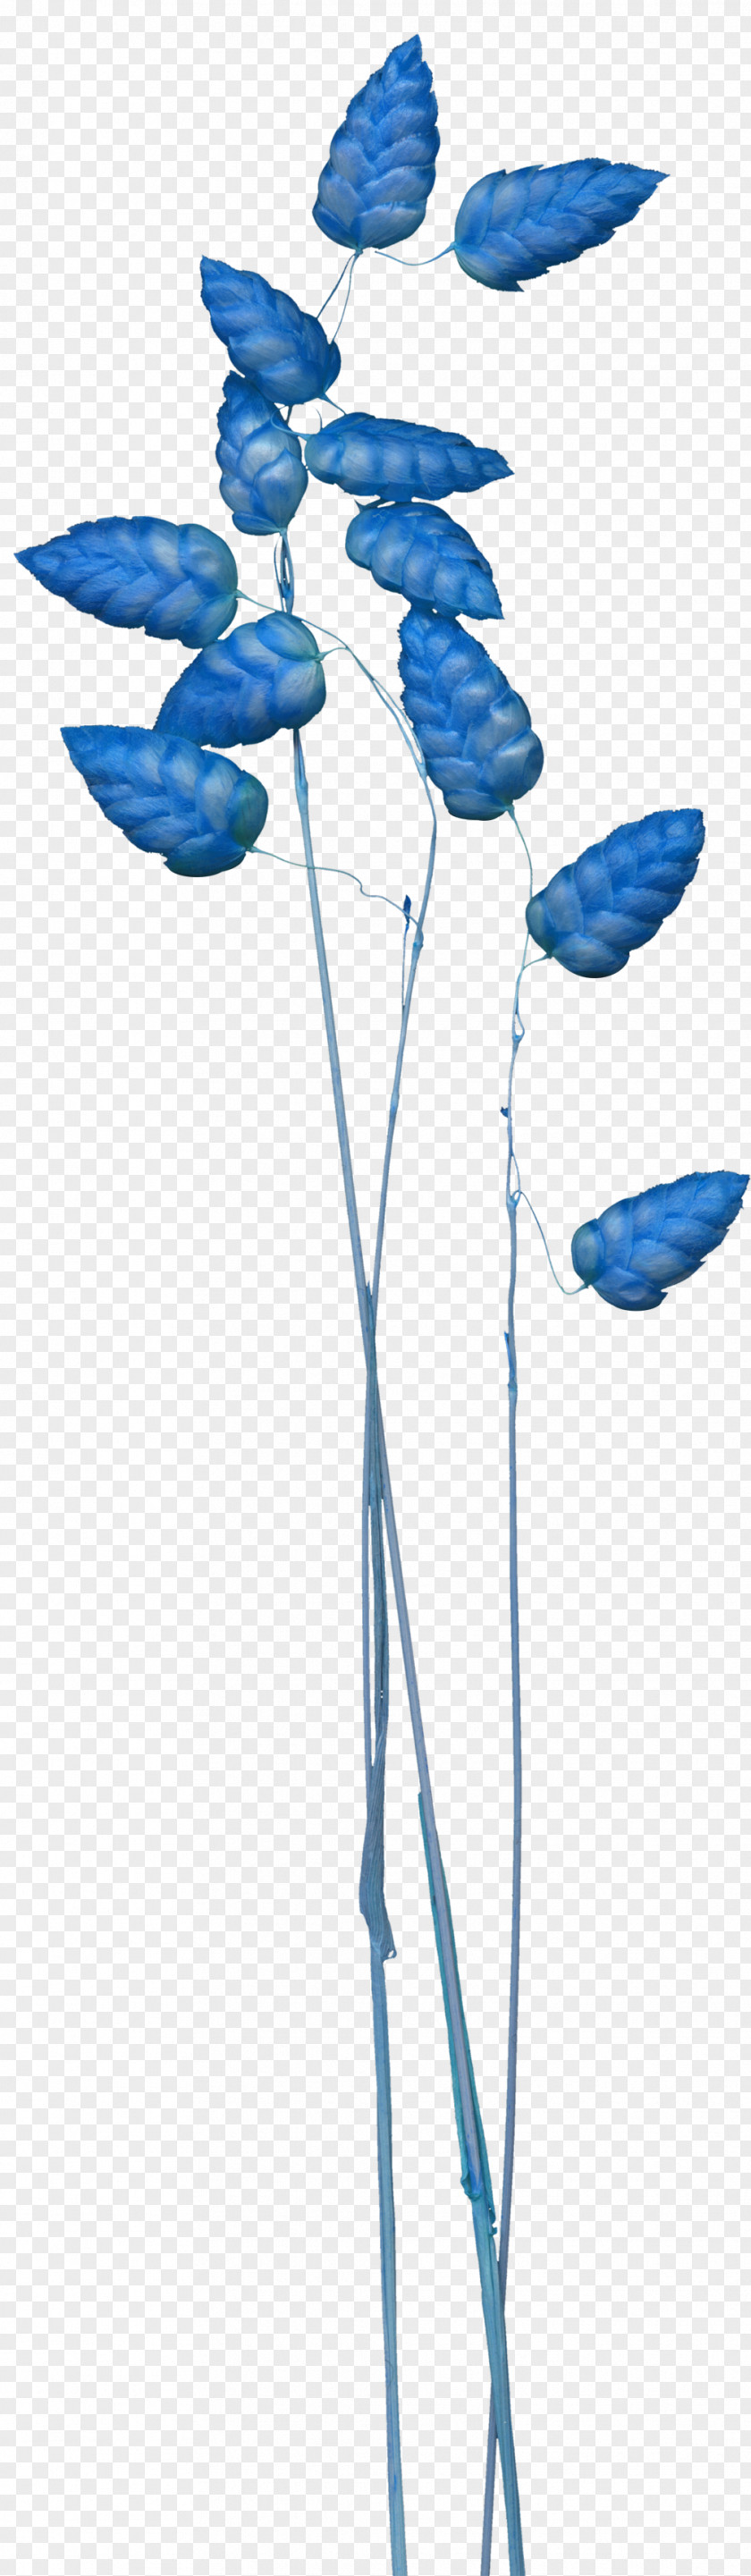 Blue Leaves Small Balloon Clip Art PNG